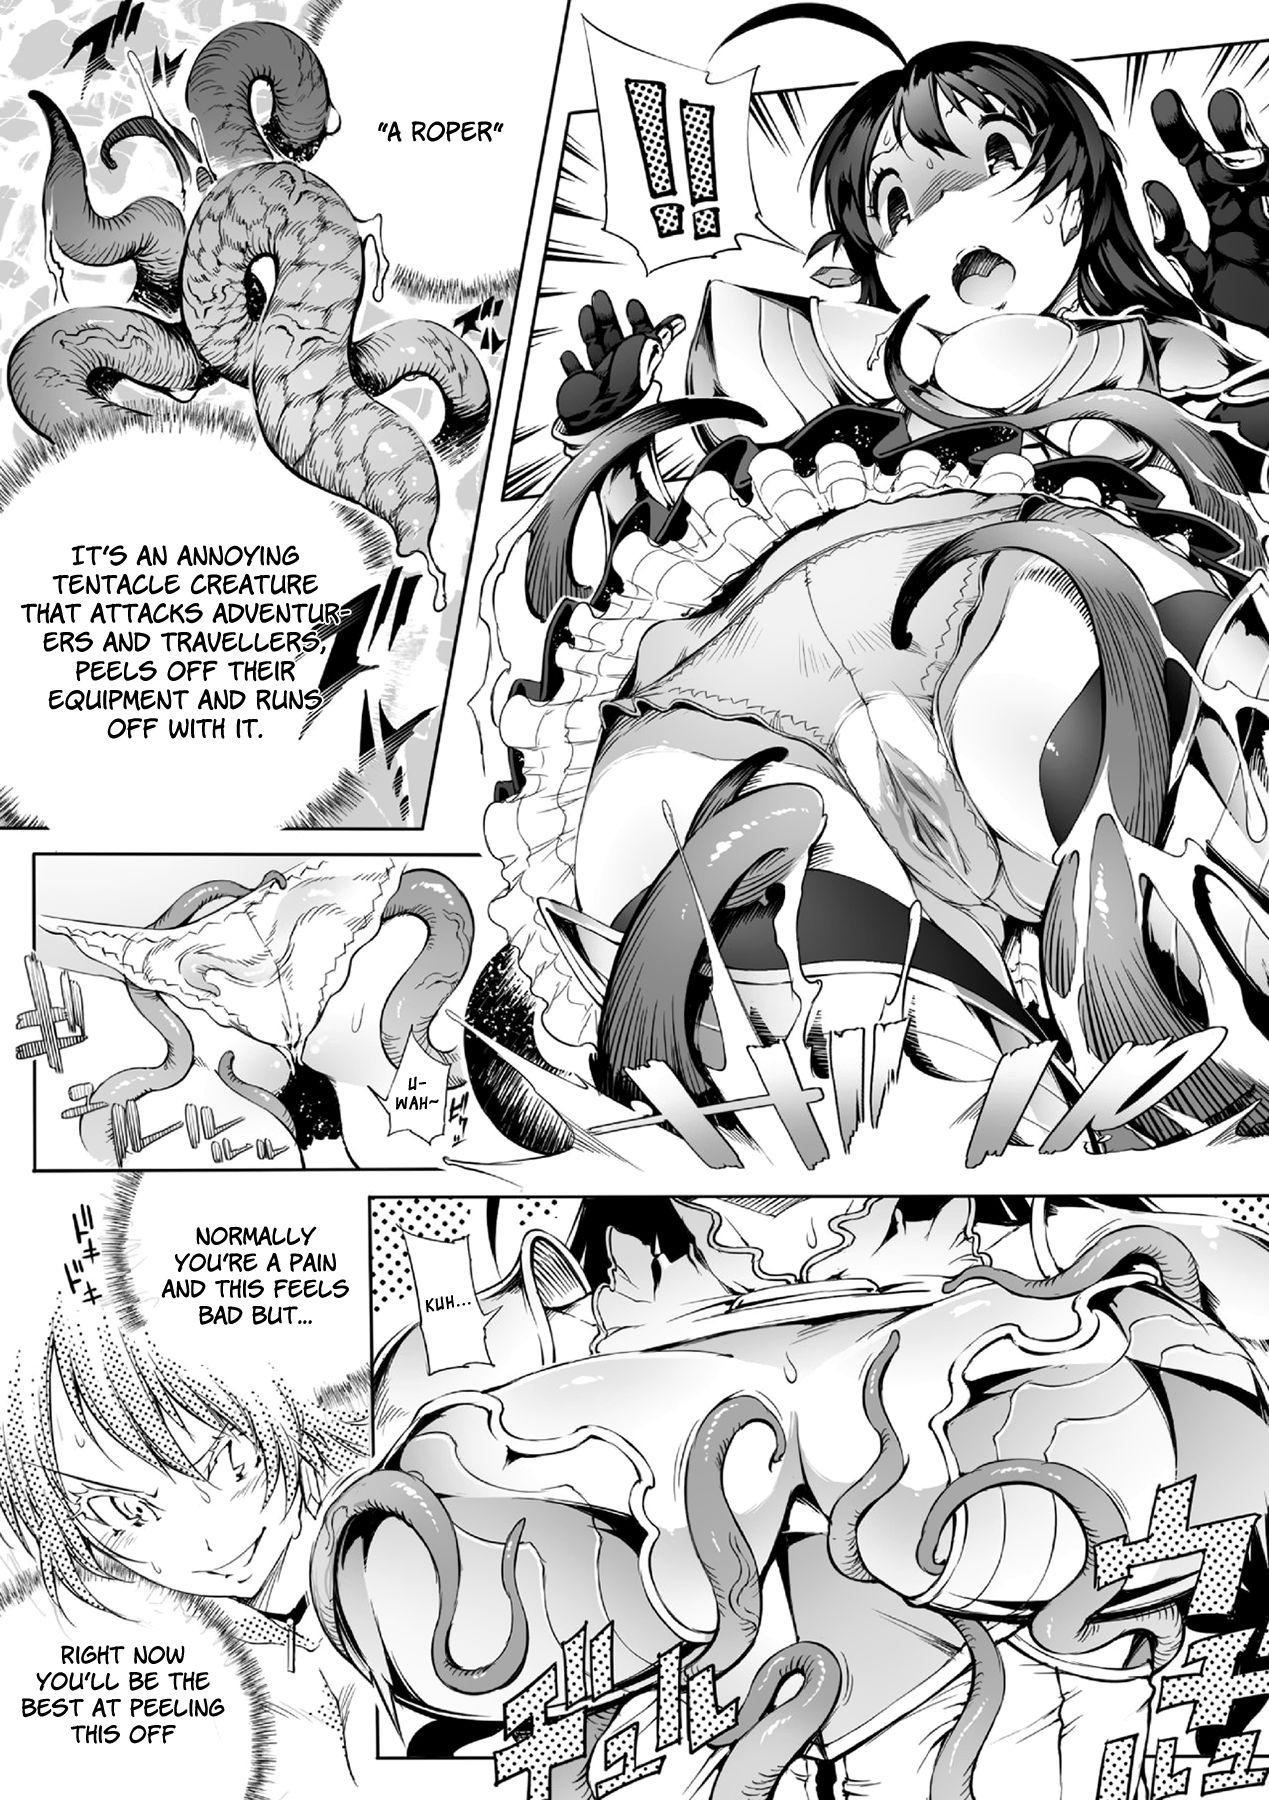 Top Roper Quest - Soshite Botebara e... | Roper Quest: And then to a pregnant belly Hard Sex - Page 6